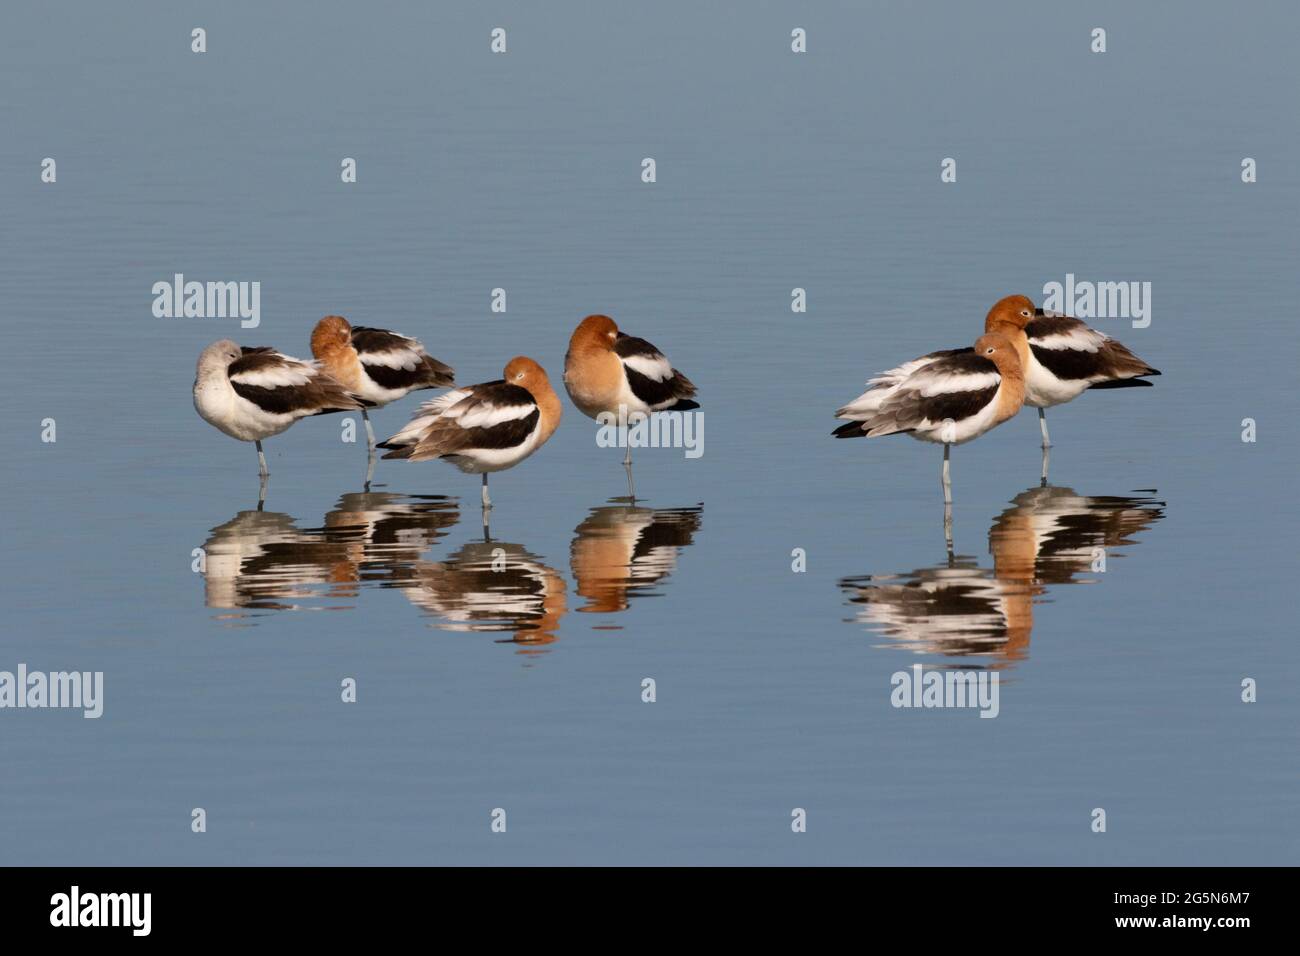 A flock of American Avocets, Recurvirostra americana, resting during Spring migration at California's Merced National Wildlife Refuge. Stock Photo